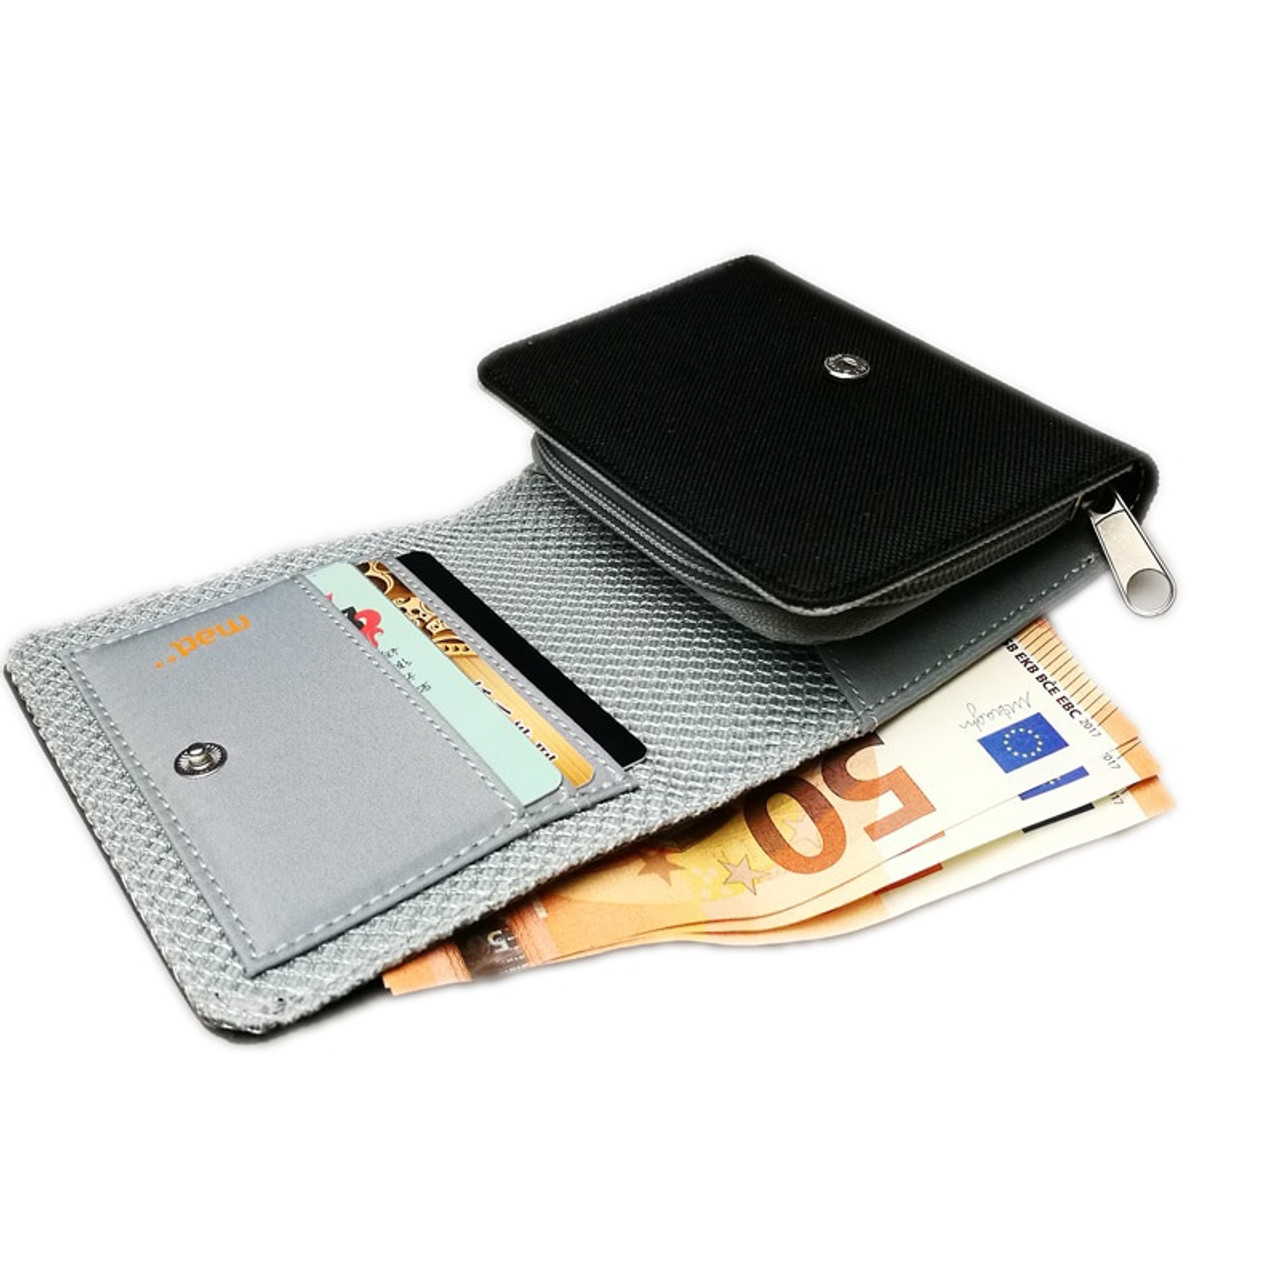 Yfashion Men Boys eens Xams ift Concise Wearable PU Leather Multi Position  Wallet Purse